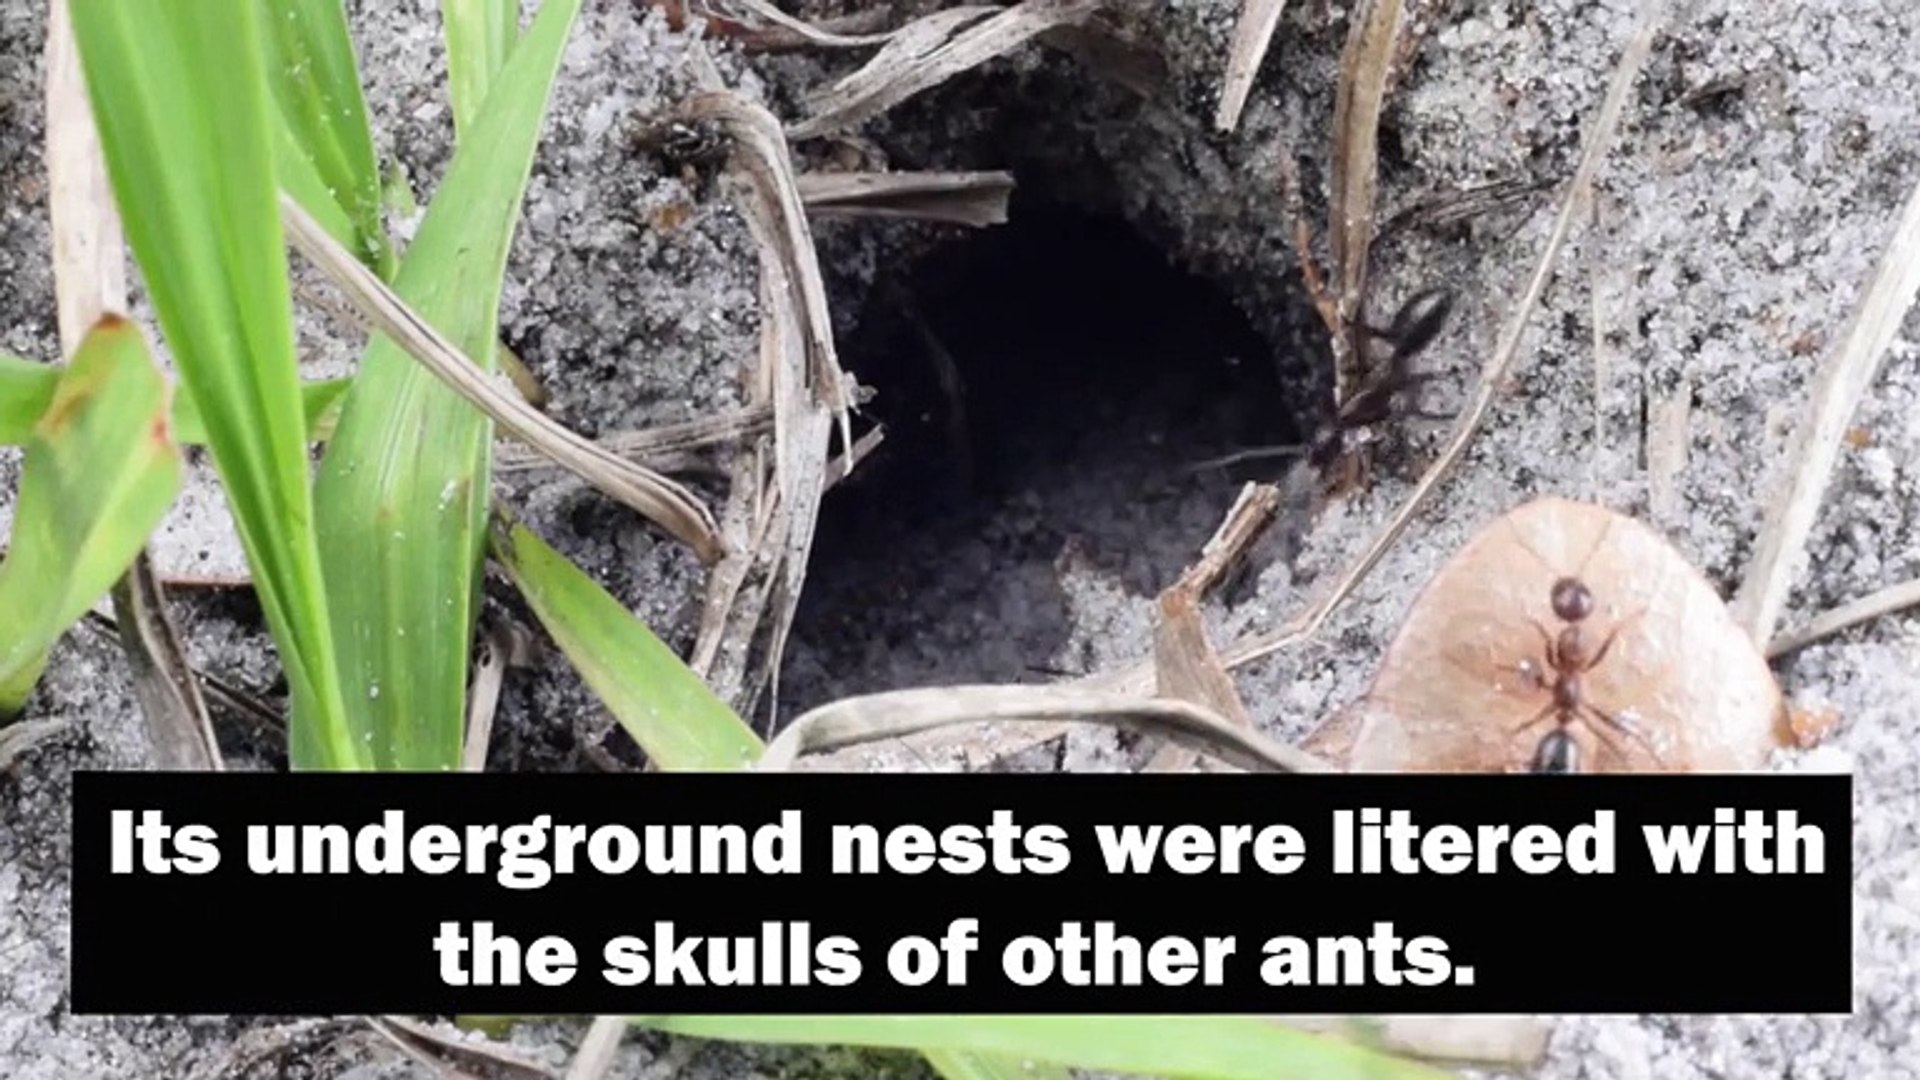 Florida Ants Decorate Nests With Ant Skulls They Kill